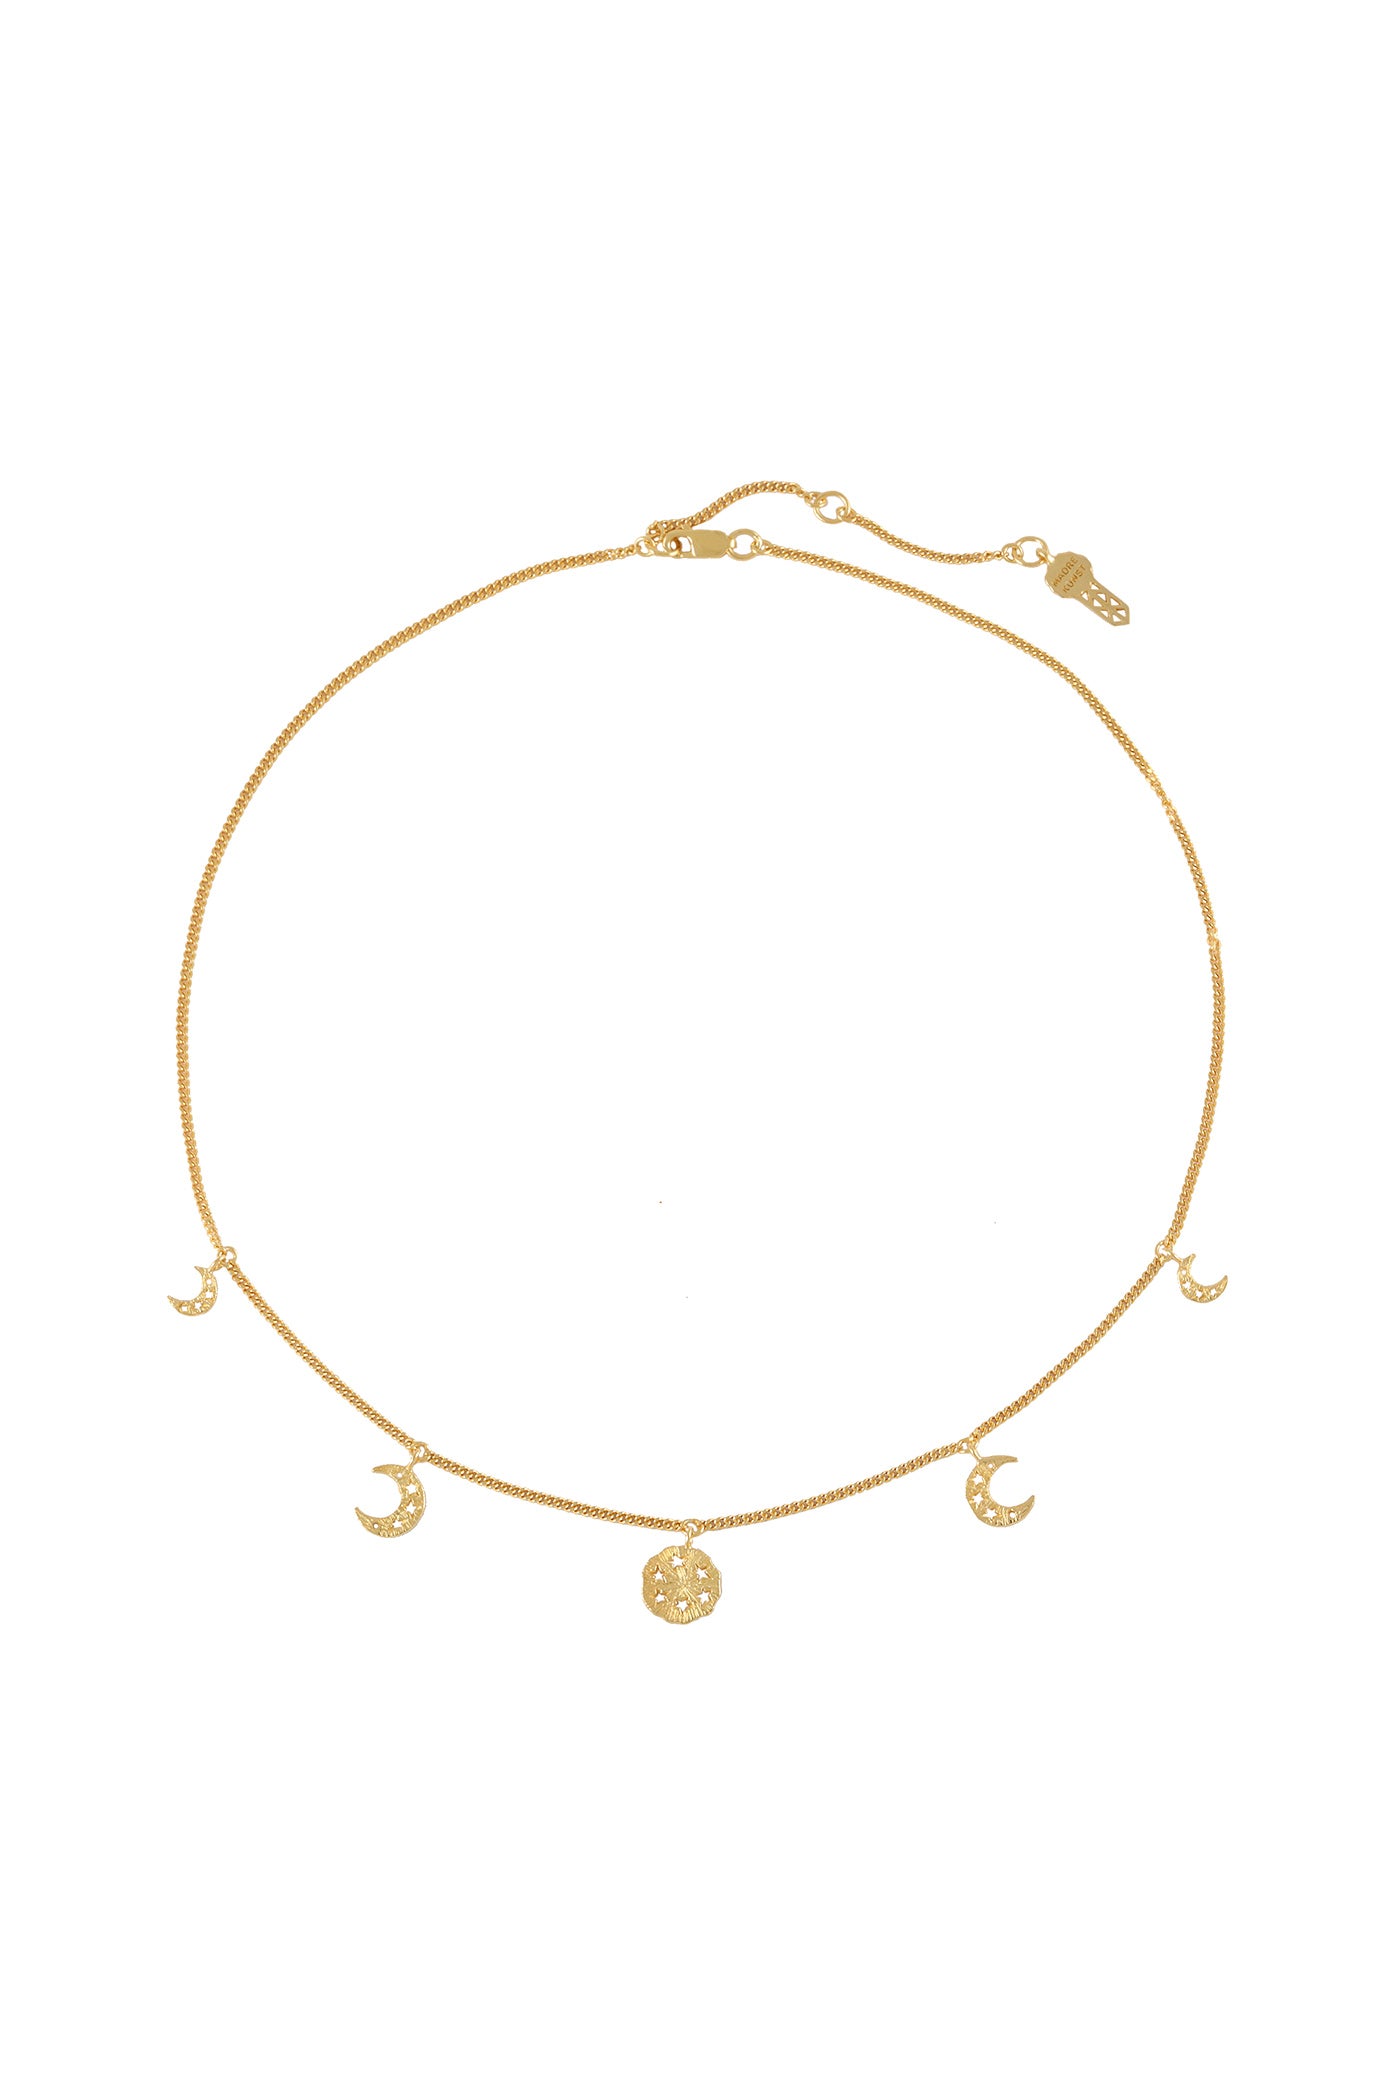 Moon cycle choker, 41 cm. Silver, gold plated